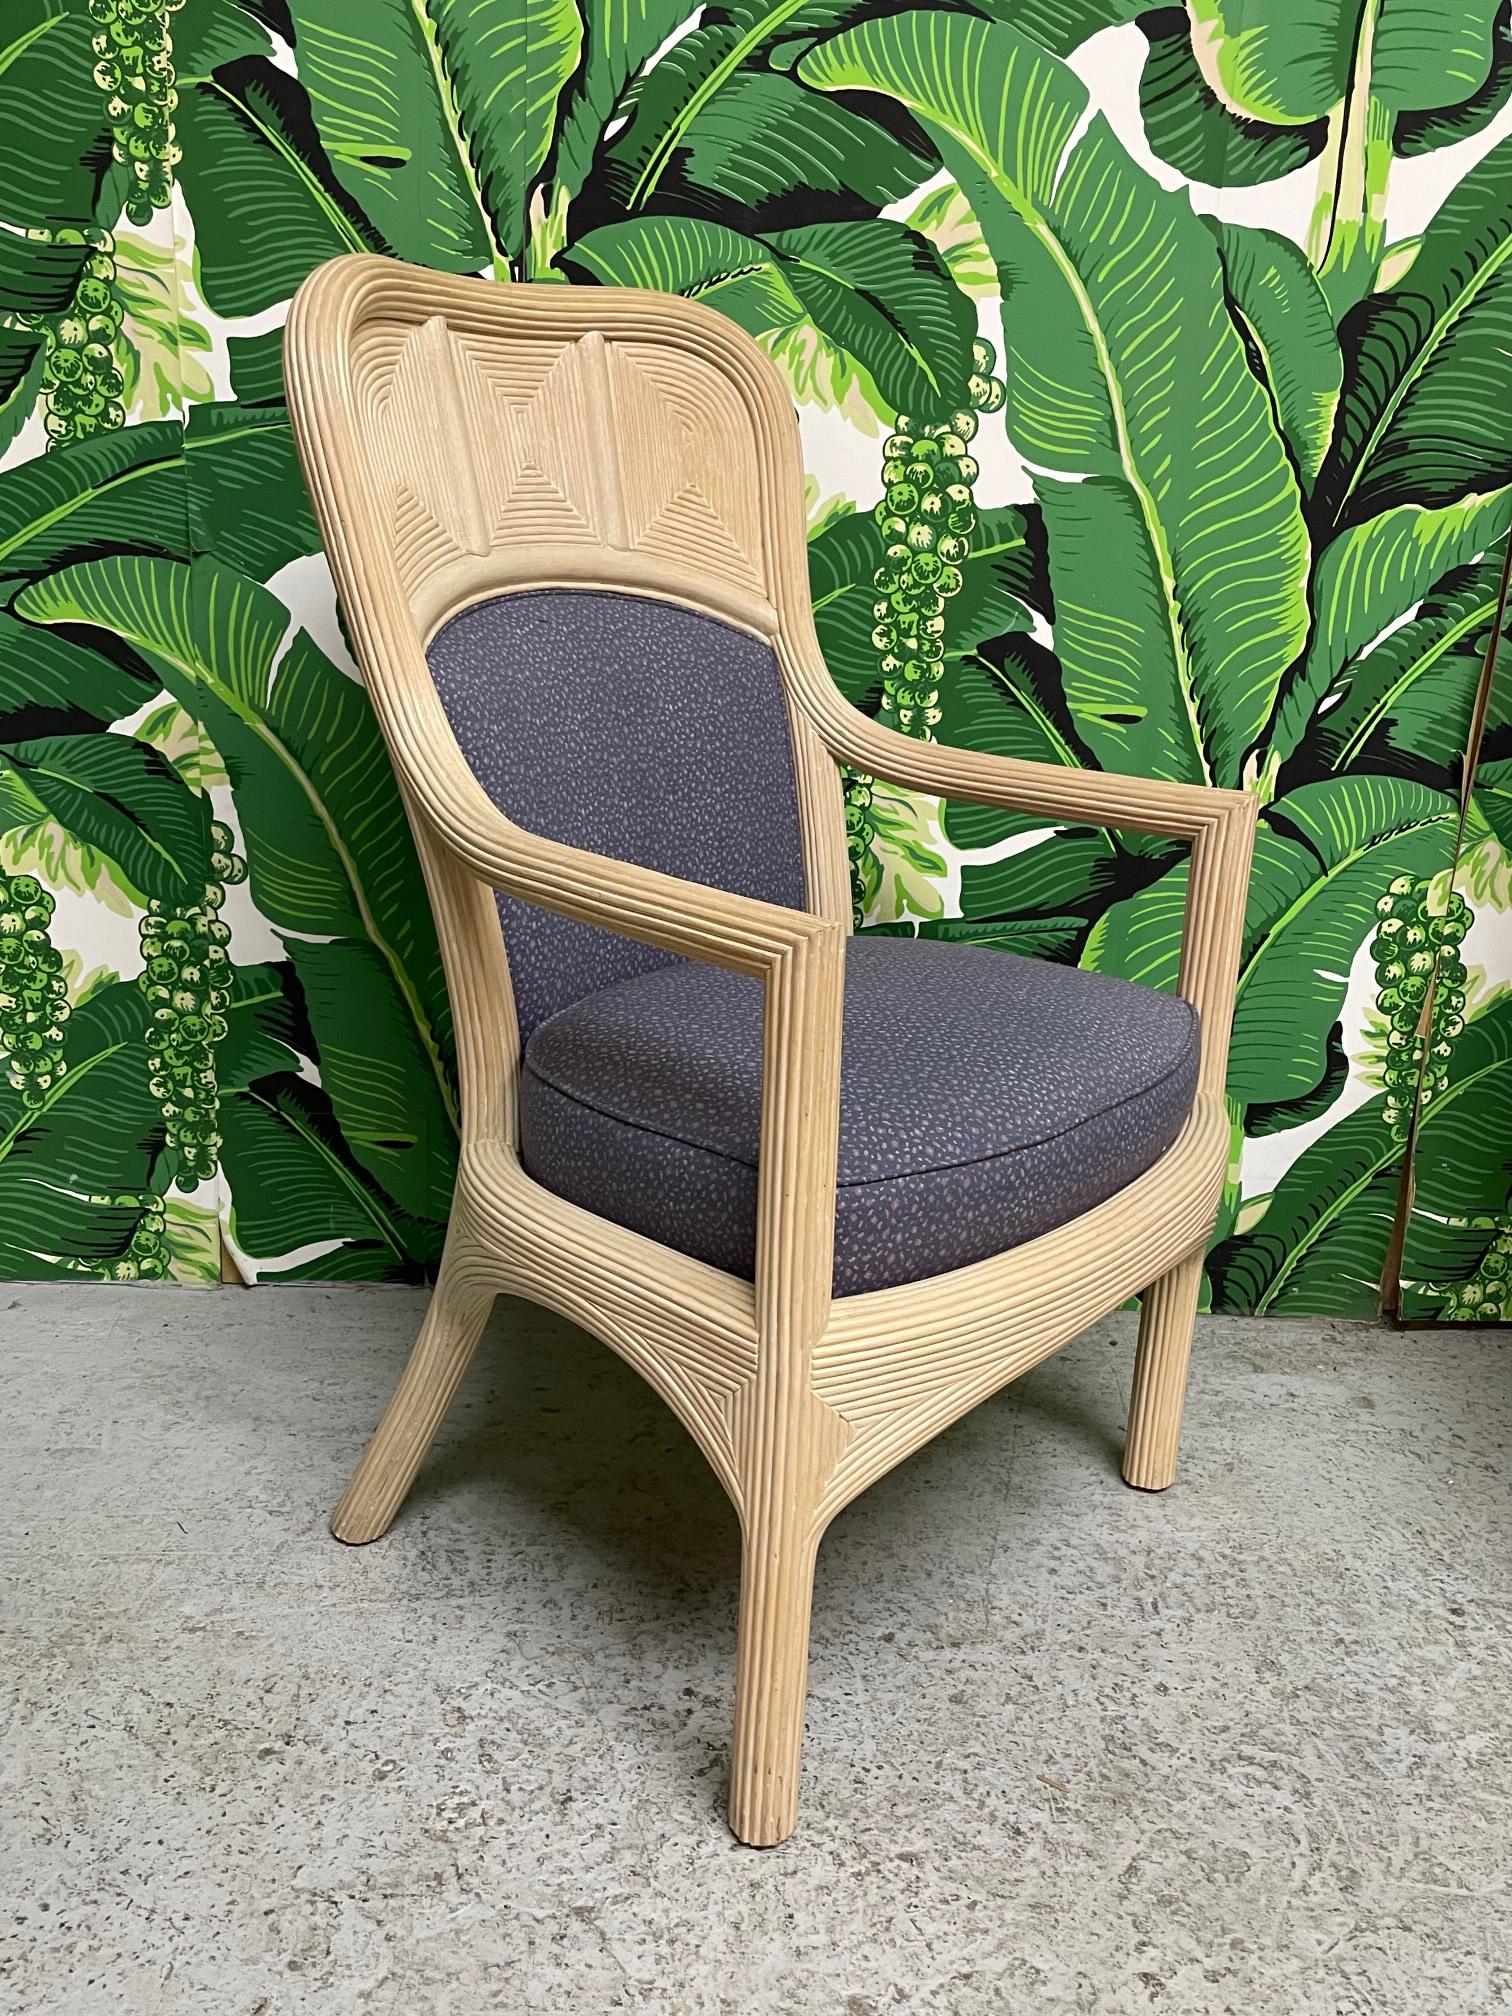 Set of six dining chairs feature full veneer of pencil reed rattan in a unique geometric design. Comfortable back and seat cushions. Upholstered in a purple floral pattern. Very good condition with only minor imperfections consistent with age. May